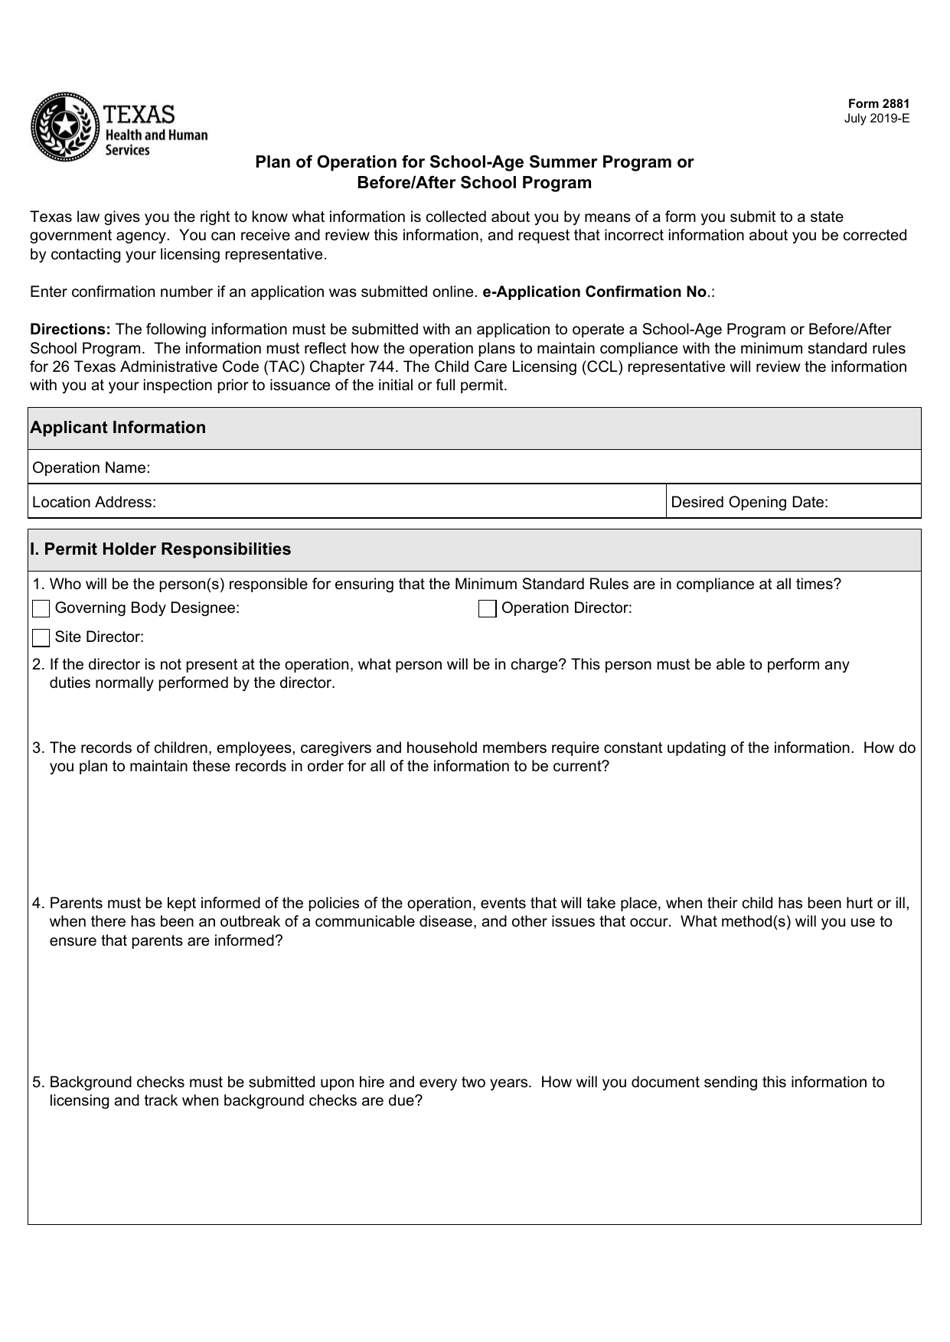 Form 2881 Plan of Operation for School-Age Summer Program or Before / After School Program - Texas, Page 1